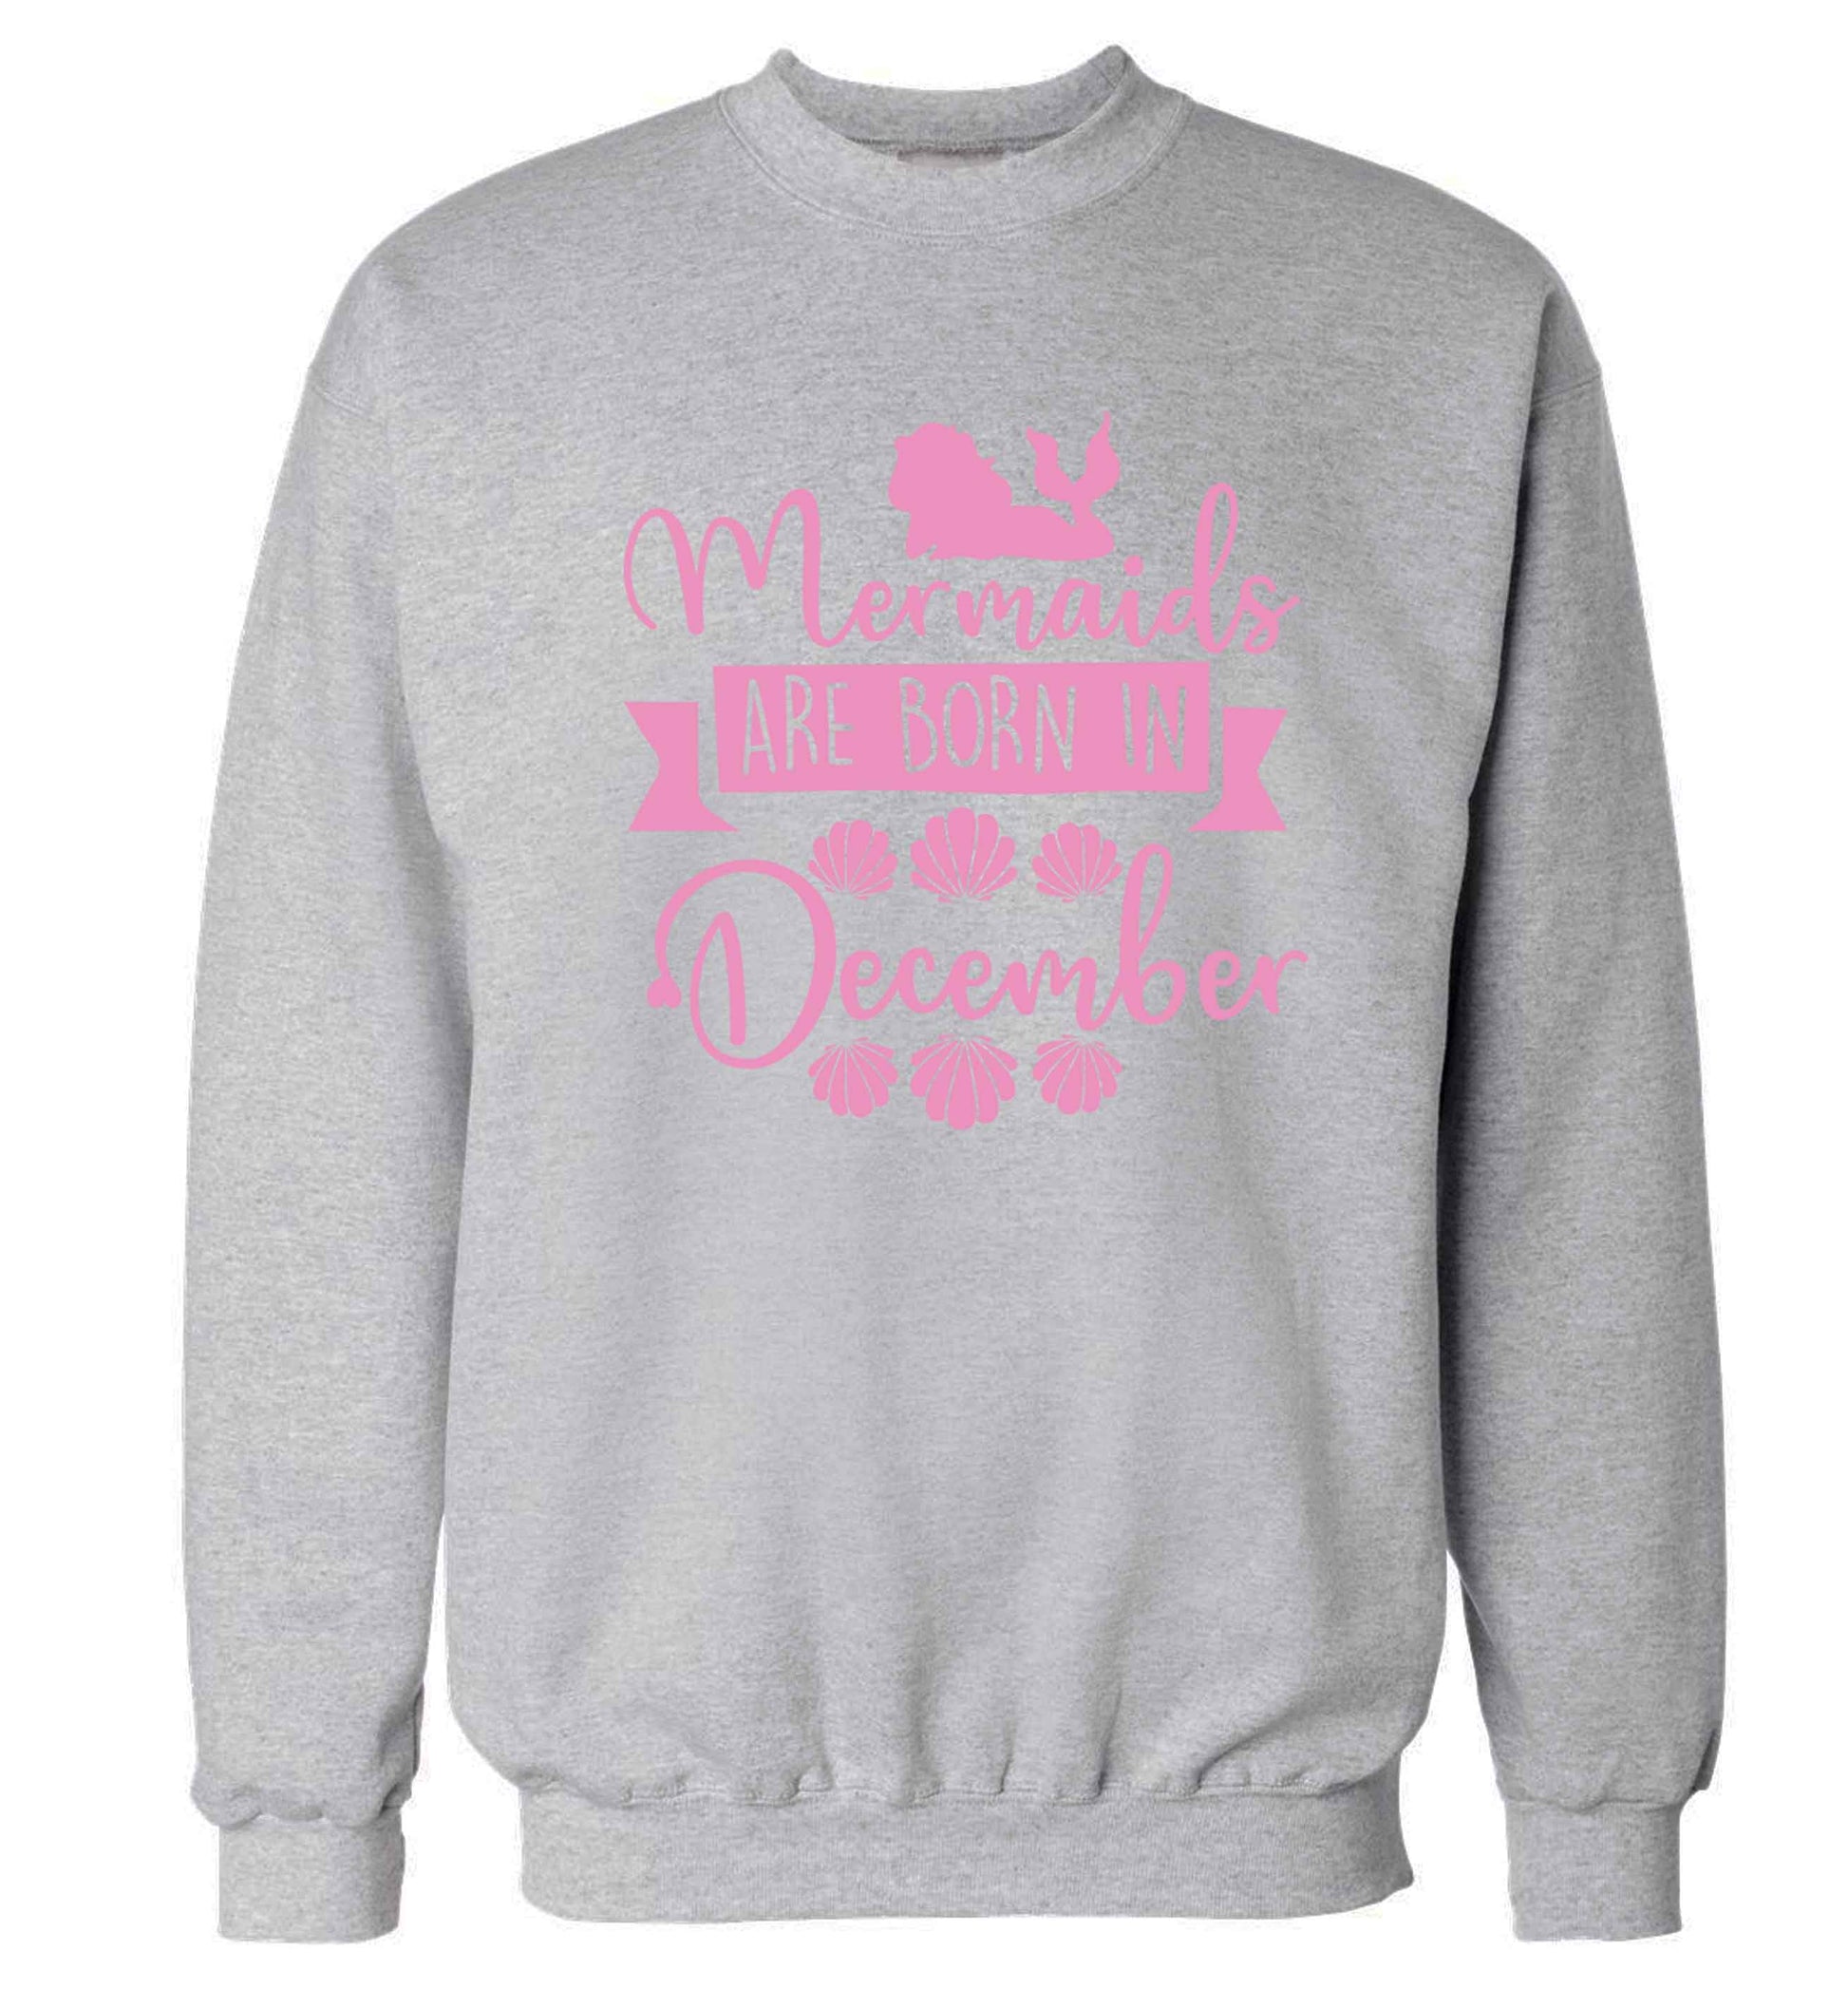 Mermaids are born in December Adult's unisex grey Sweater 2XL